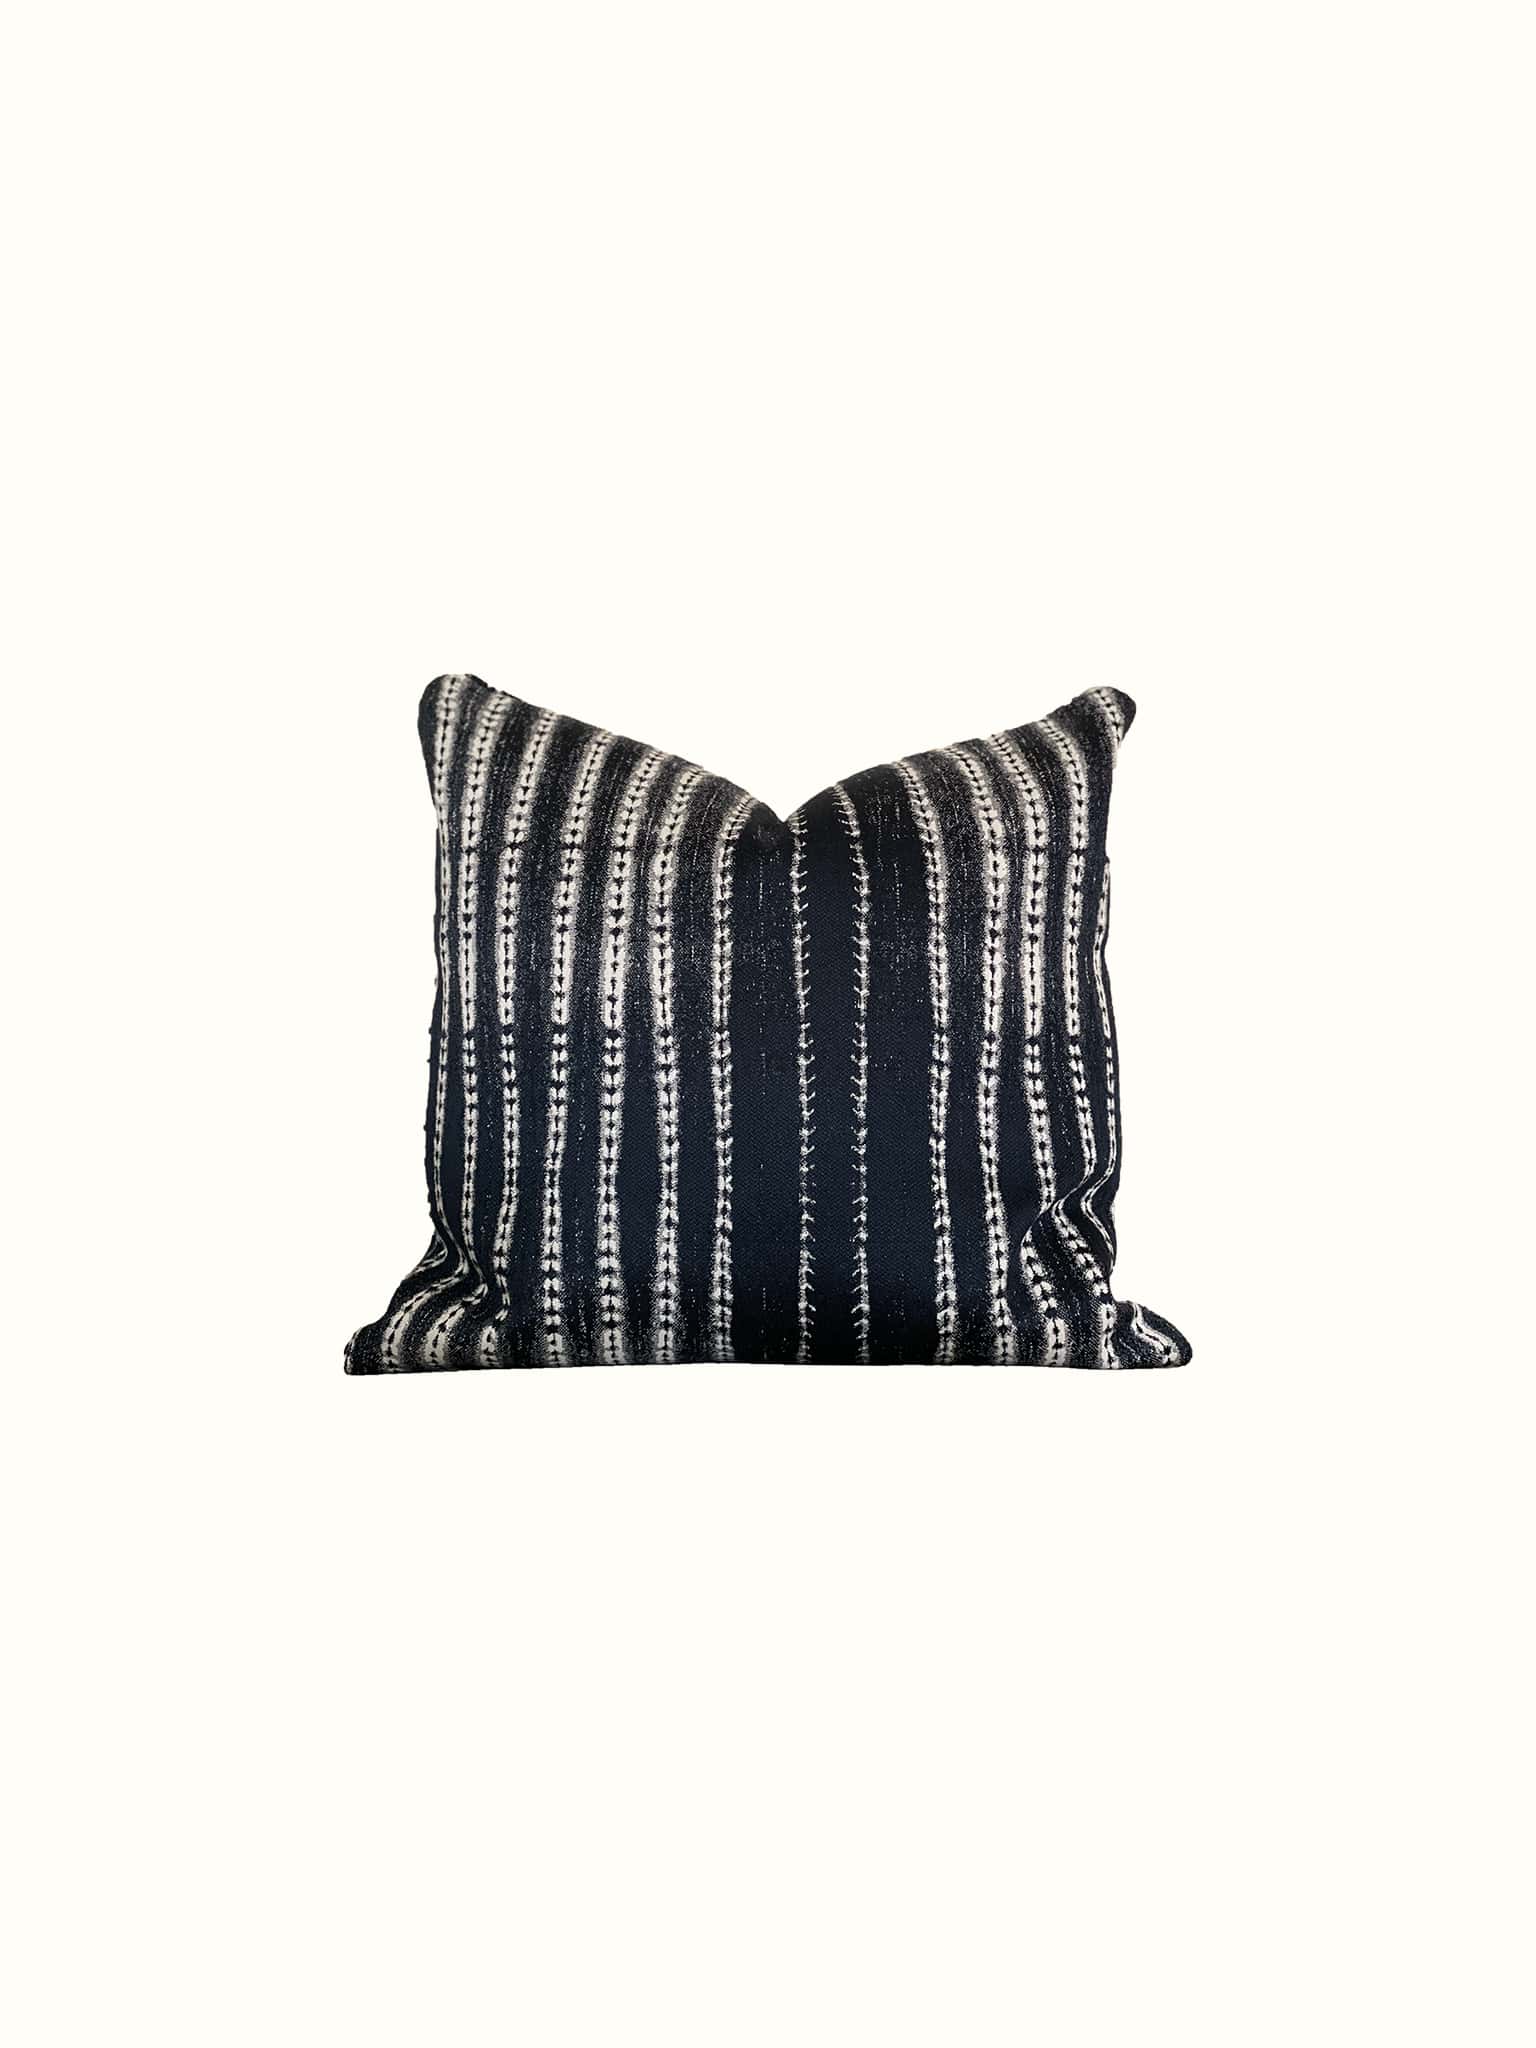 A modern class unbalanced striped throw pillow in dark blue indigo and white makes a statement piece at Cielle Home